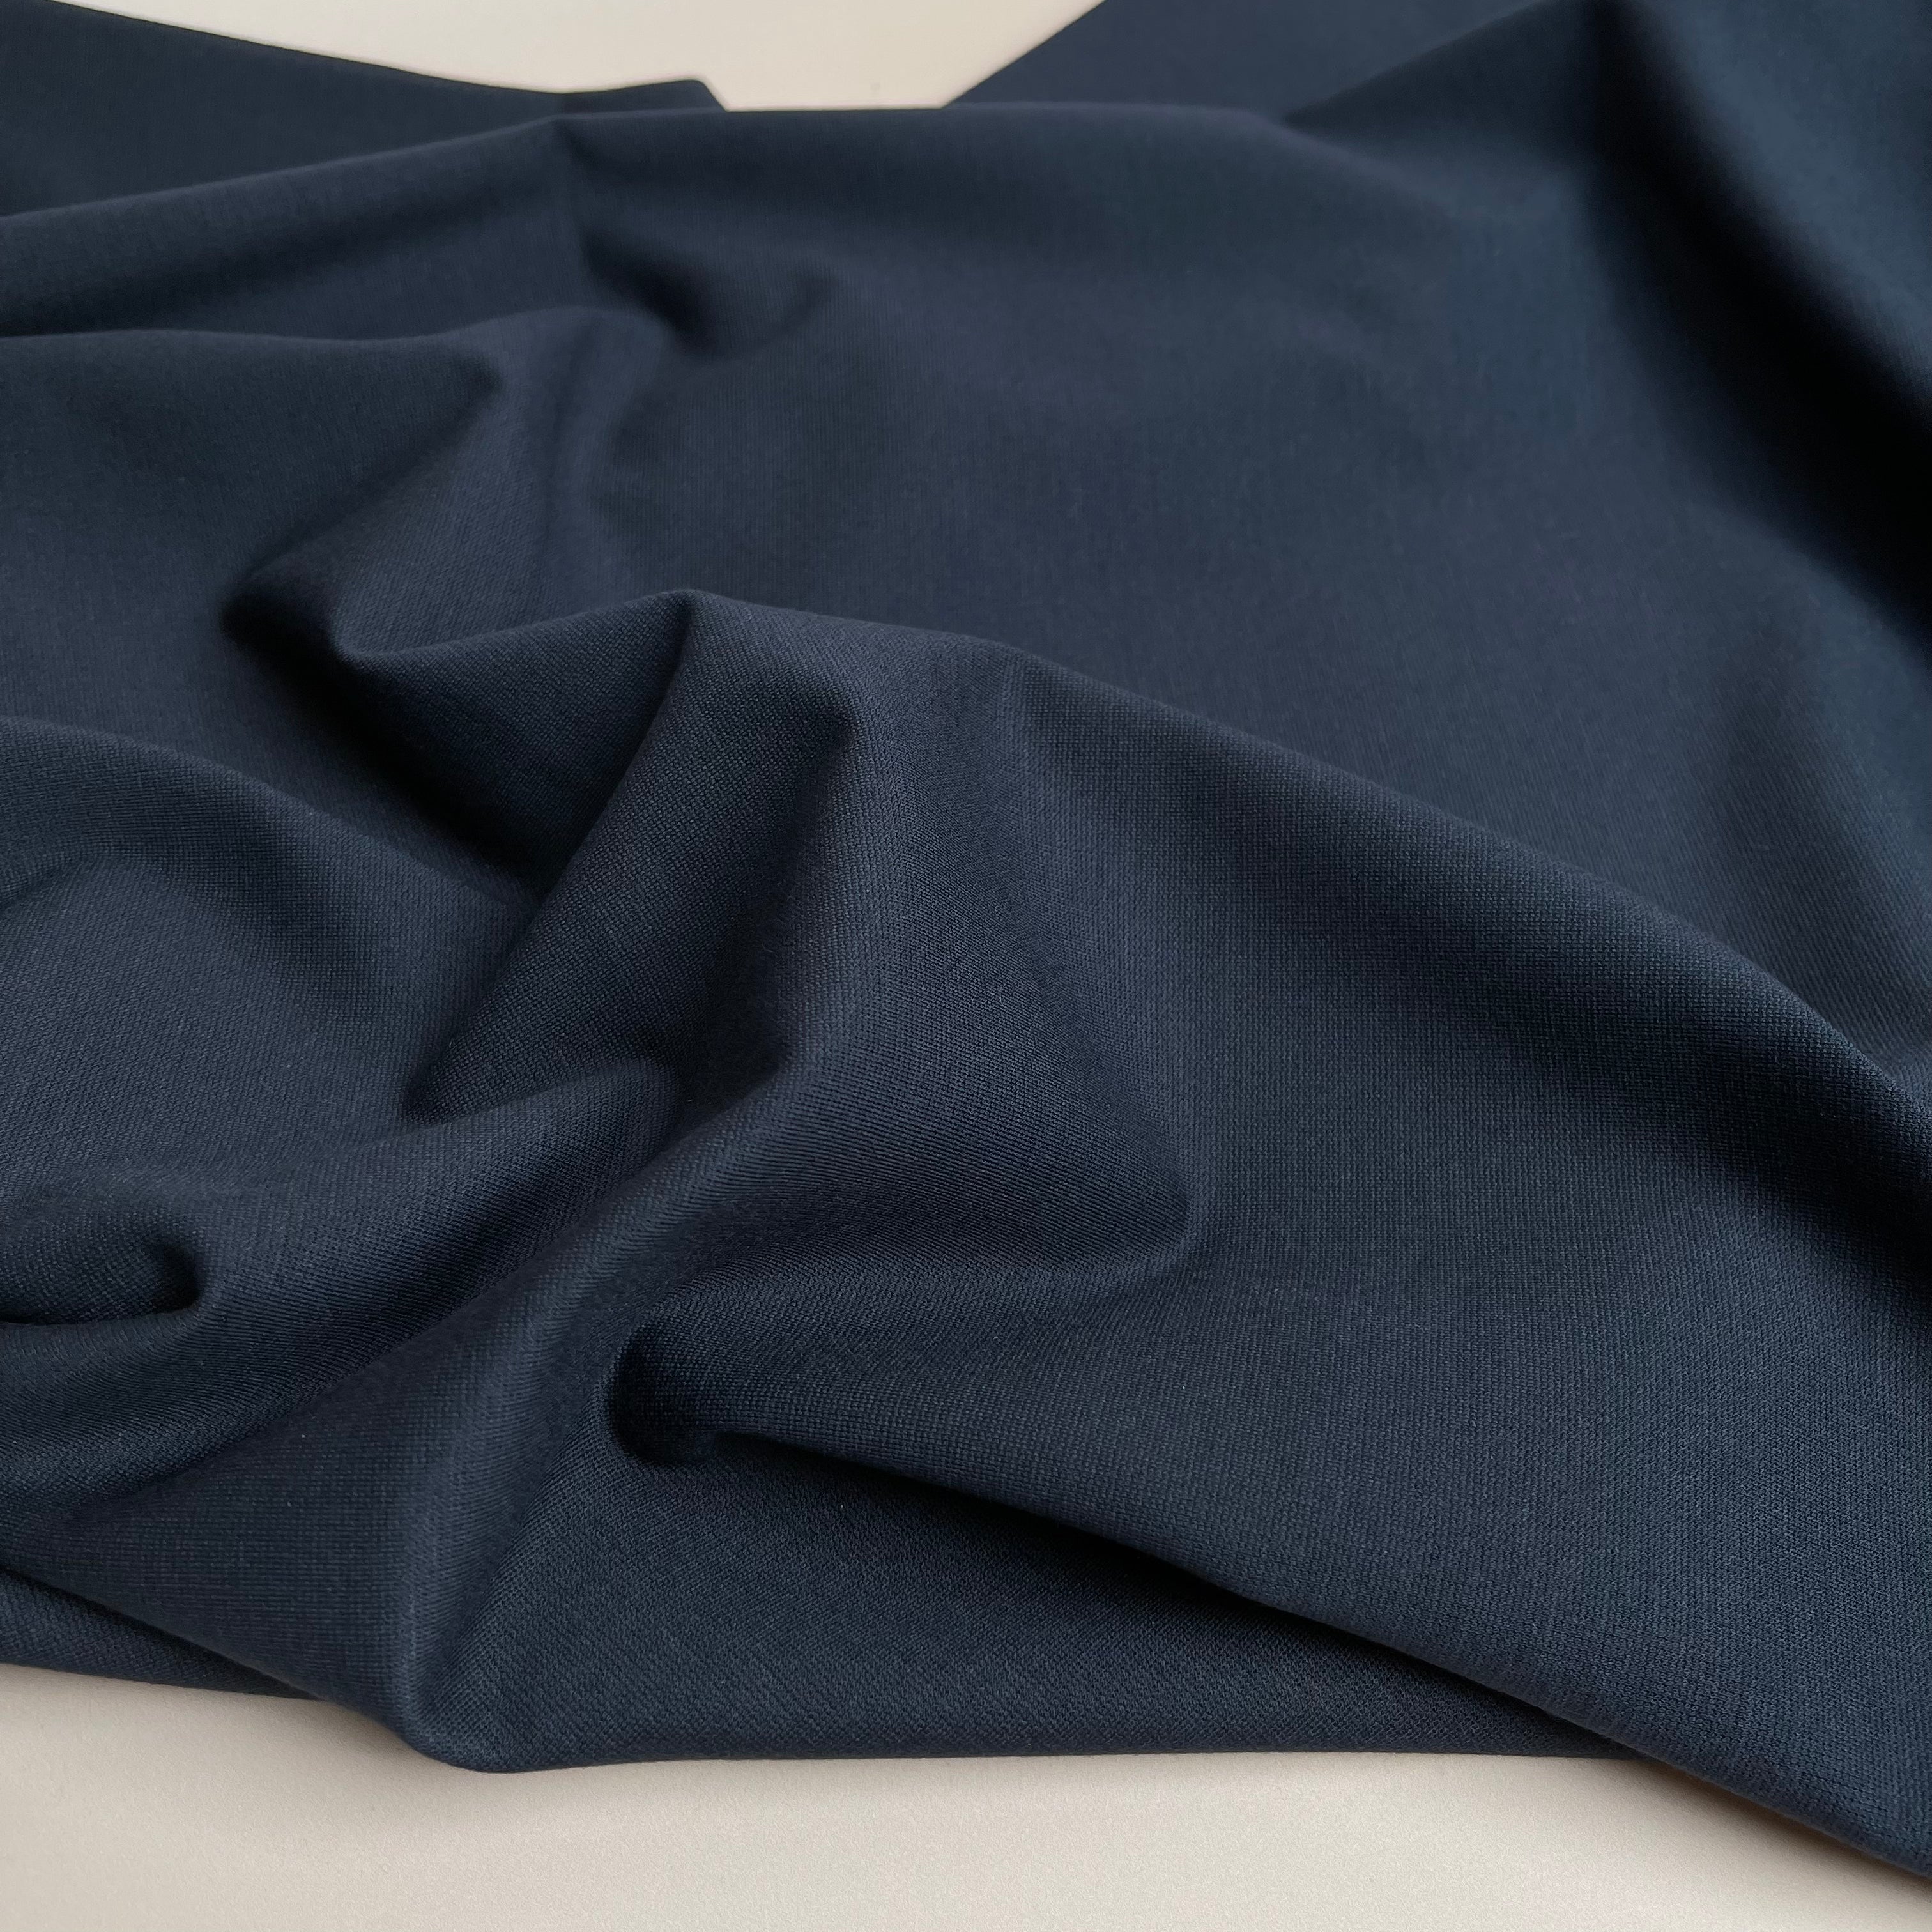 REMNANT 0.48 Metre - Navy Viscose Ponte Roma Double Knit Fabric